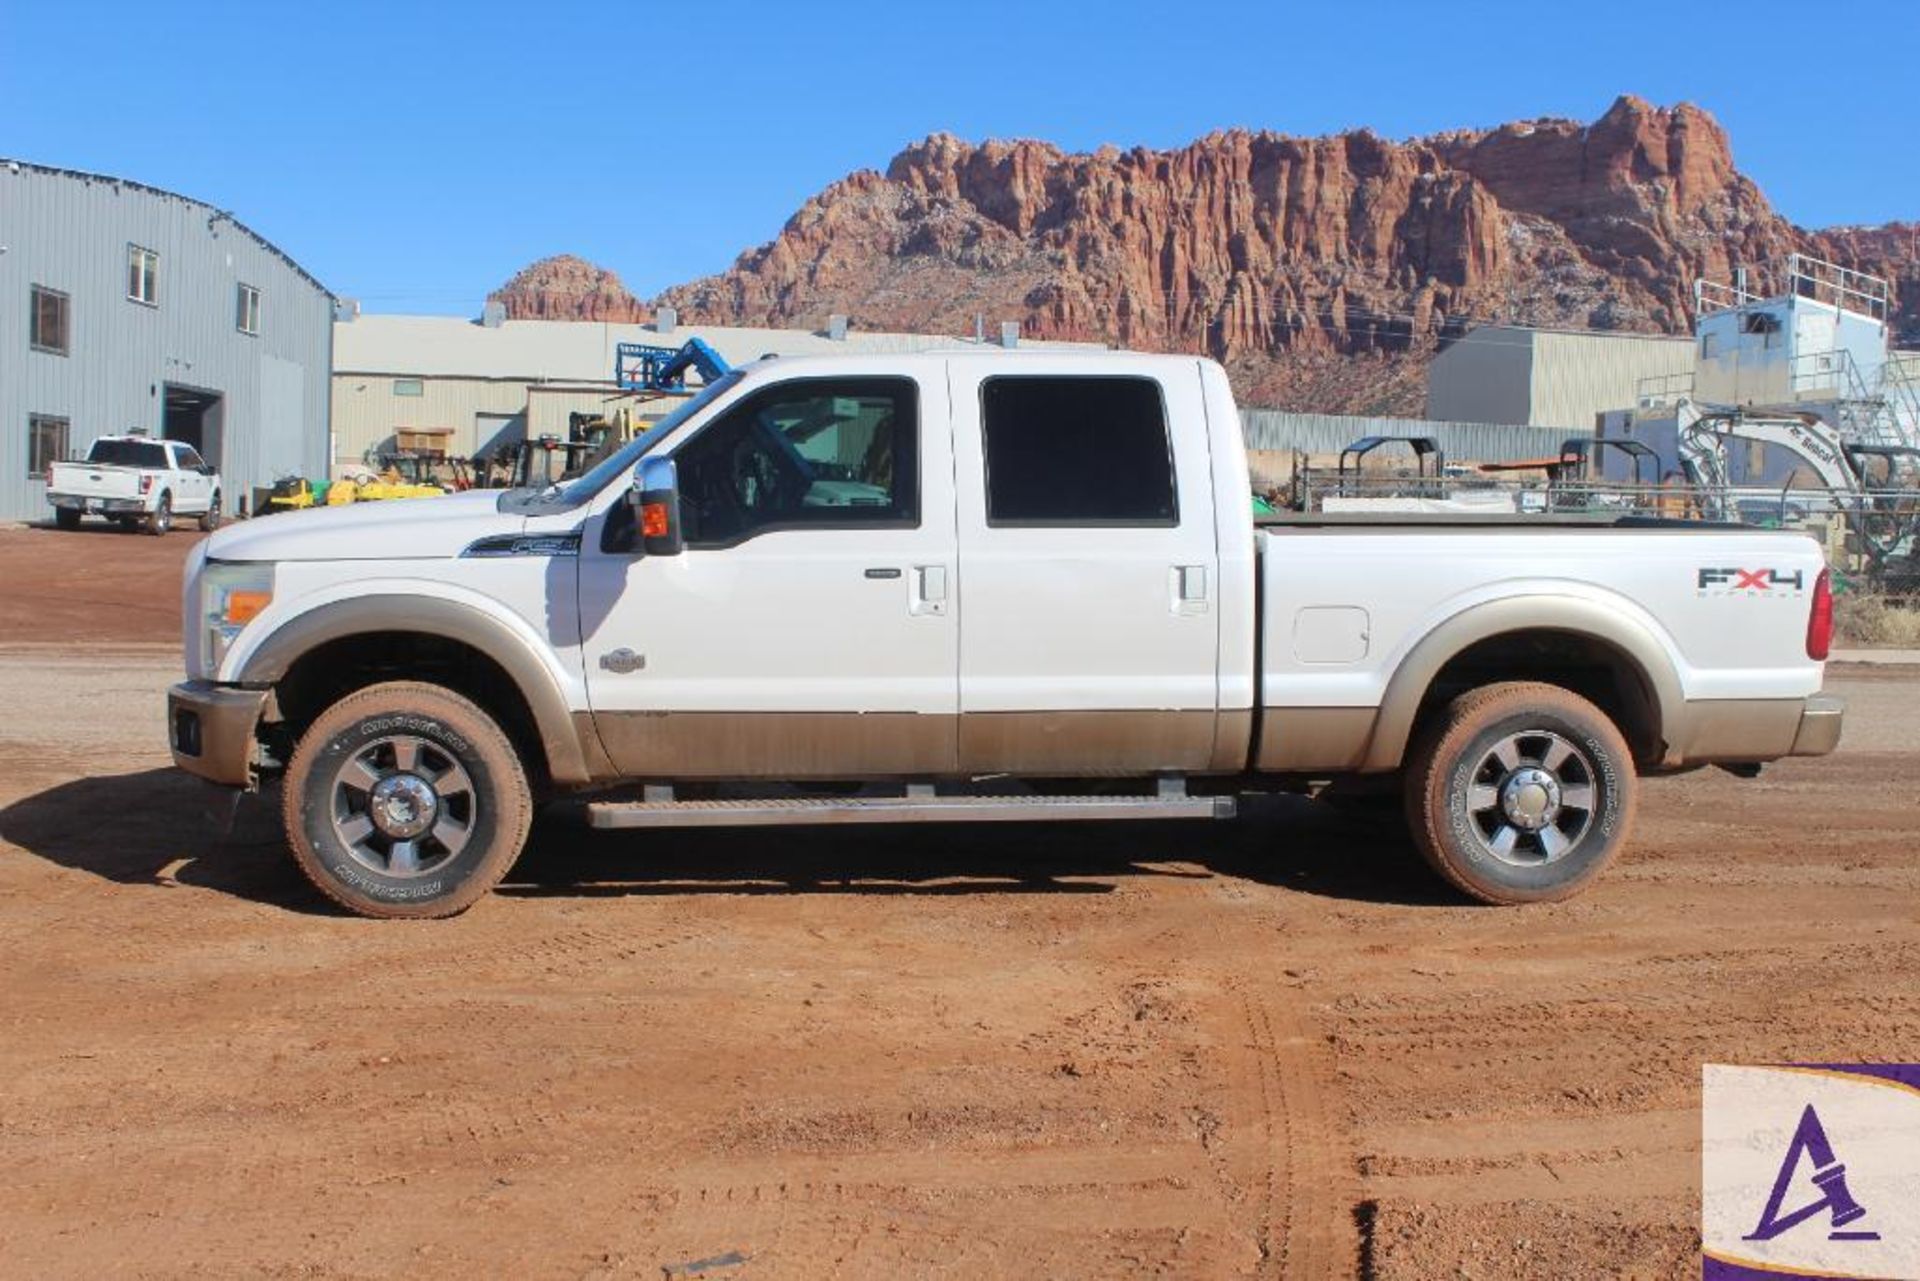 2011 F-250 4X4 Lariat Super Duty King Ranch - Image 2 of 27